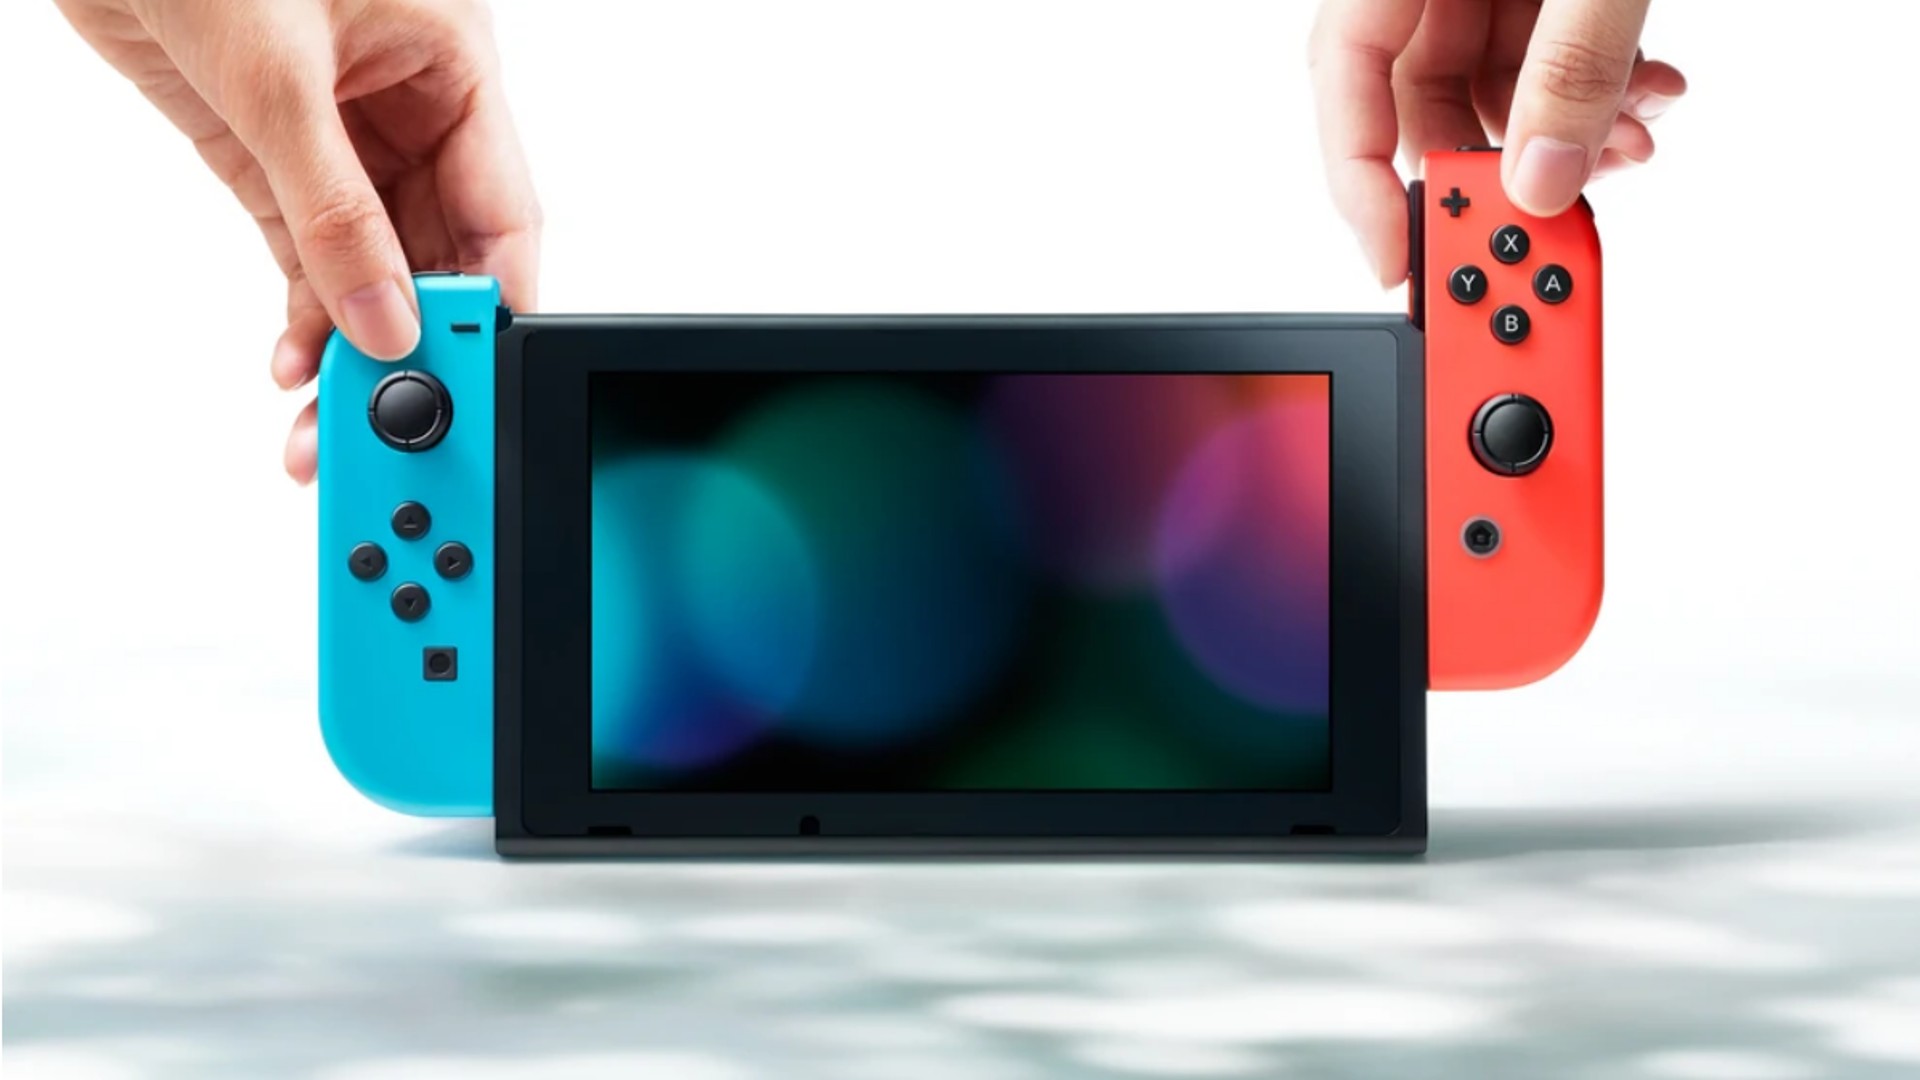 The Switch sold more games last year than any Nintendo console in history